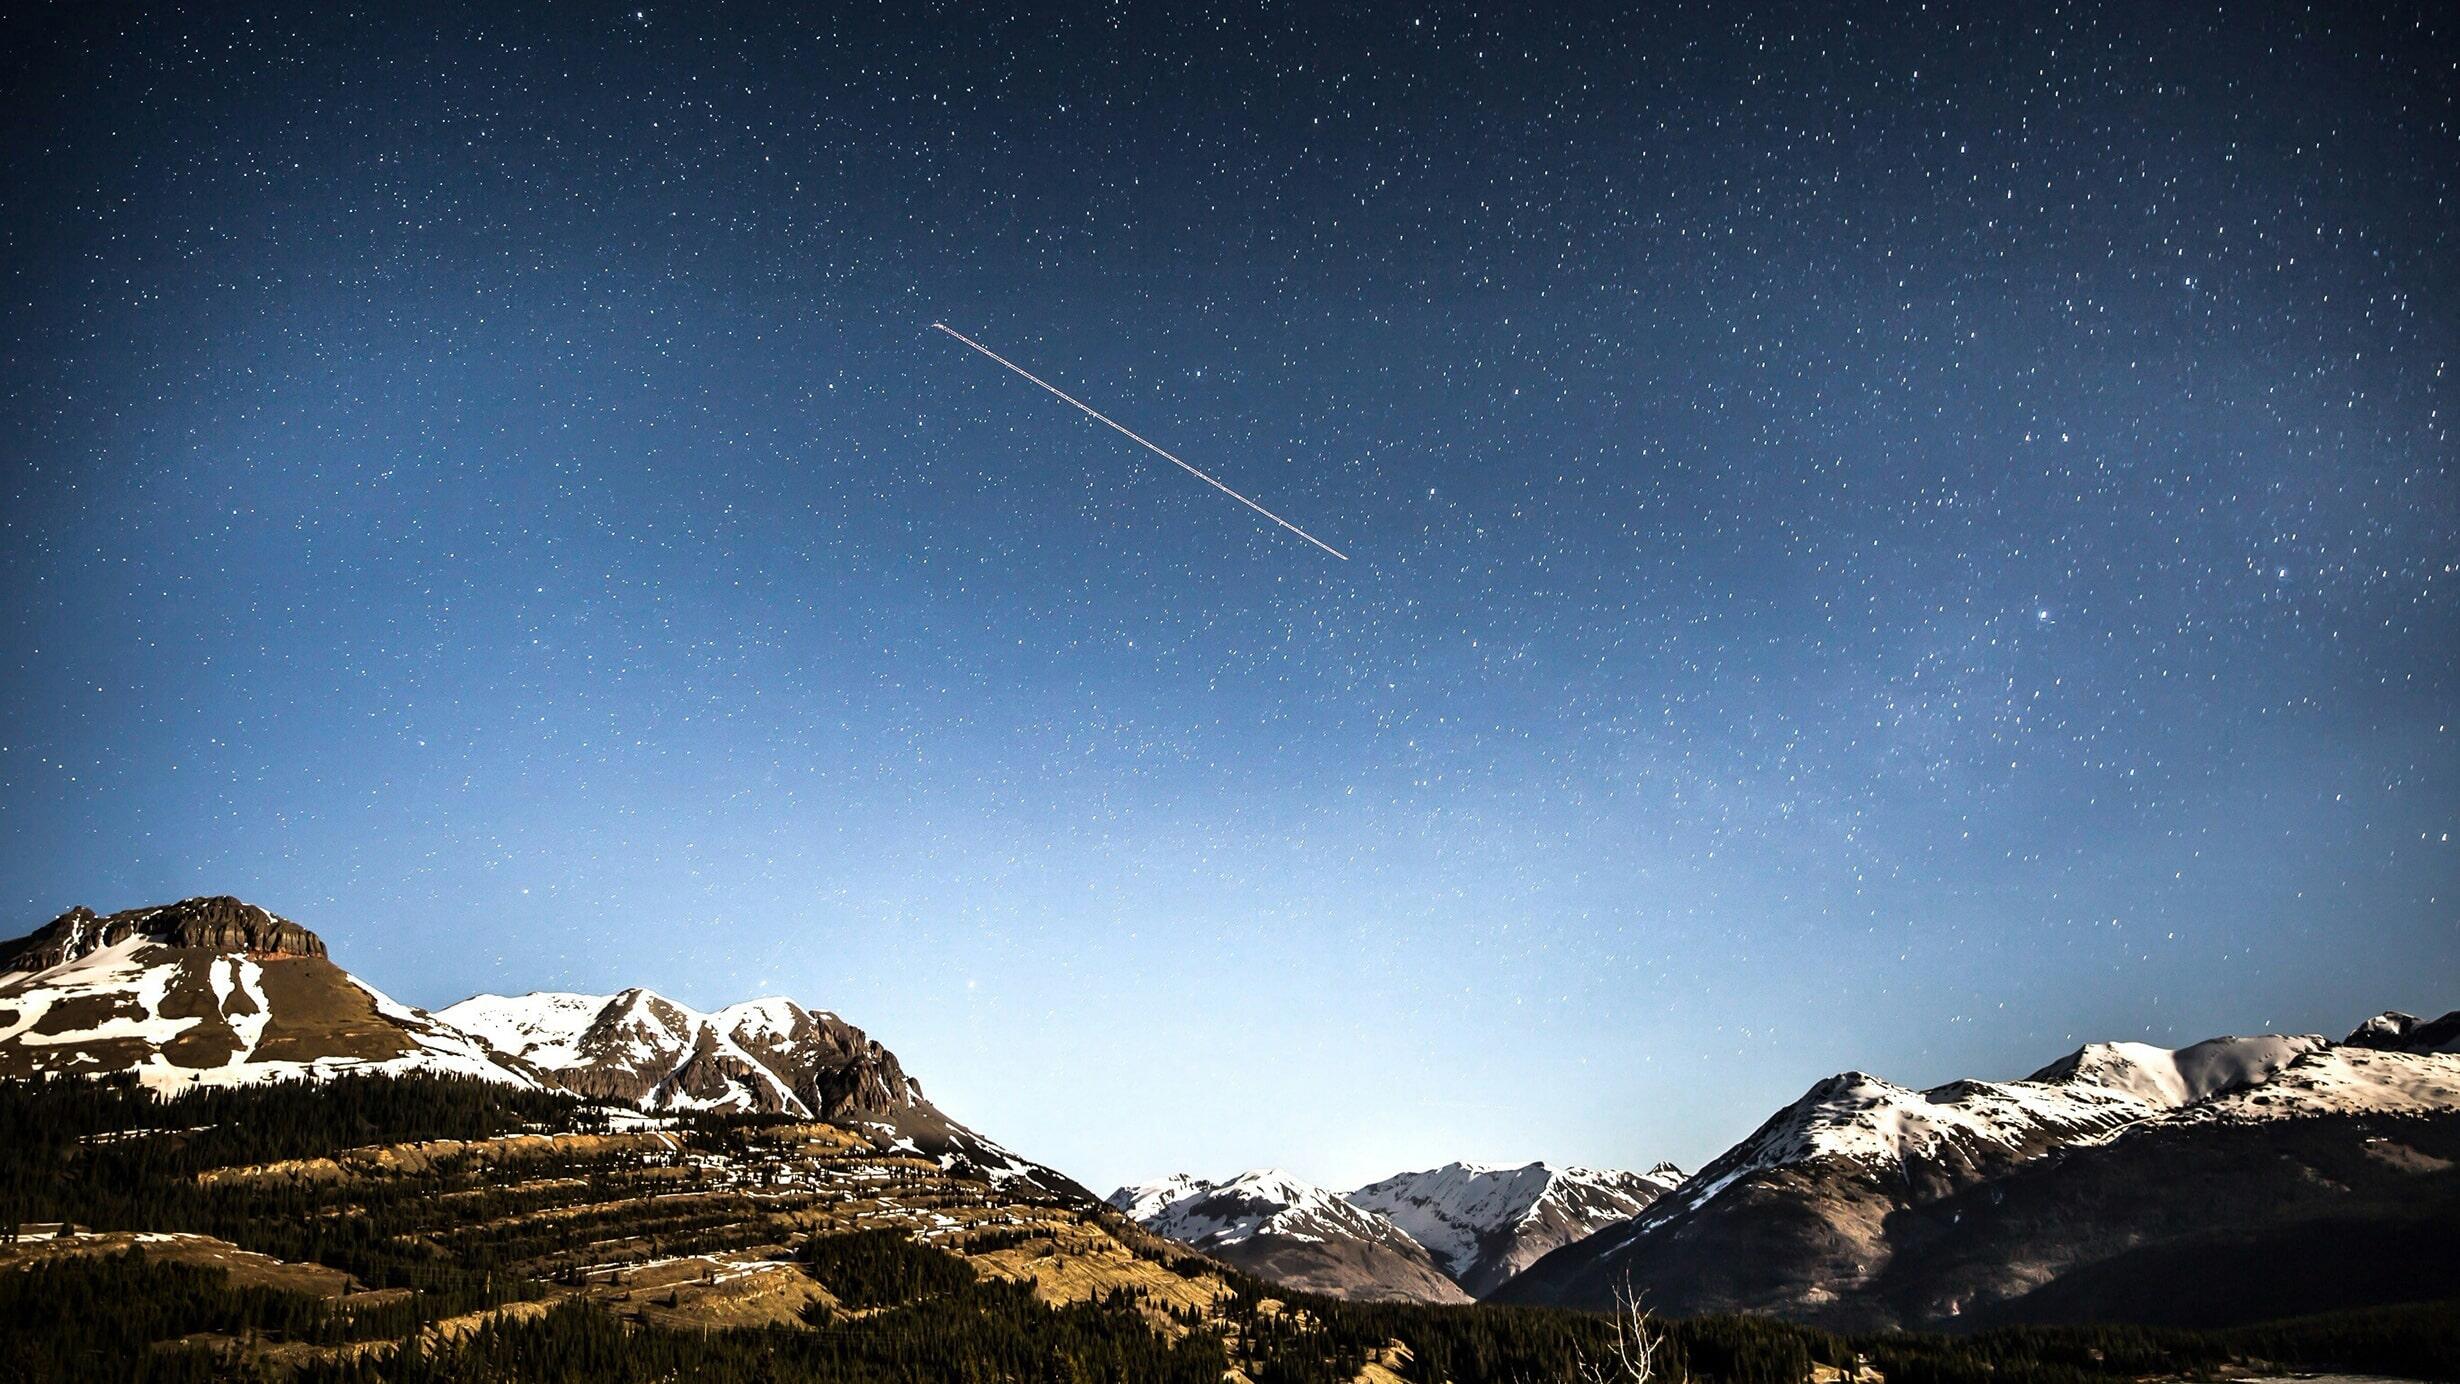 A meteorite over a mountain range at night, appearing as a bright streak of light against a rich background of stars. 